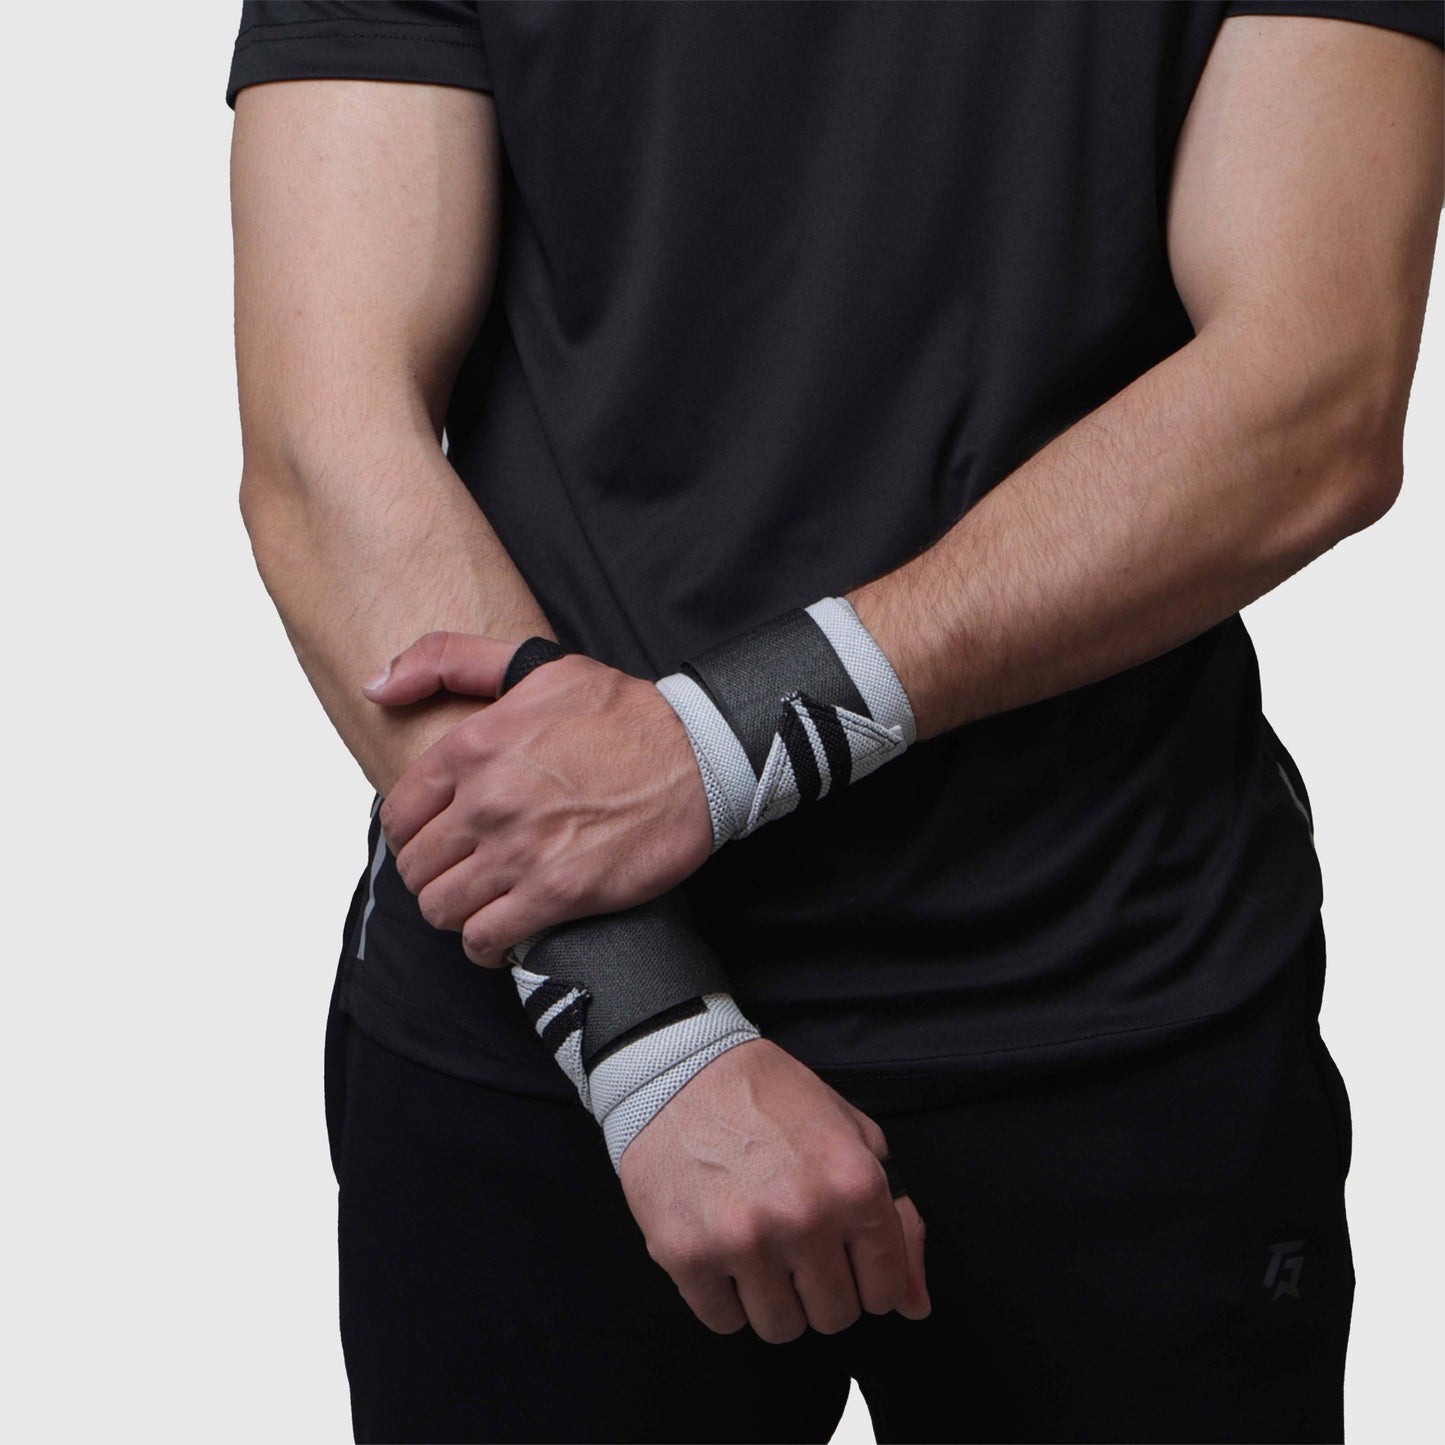 Wrist Support Band - Valetica Sports